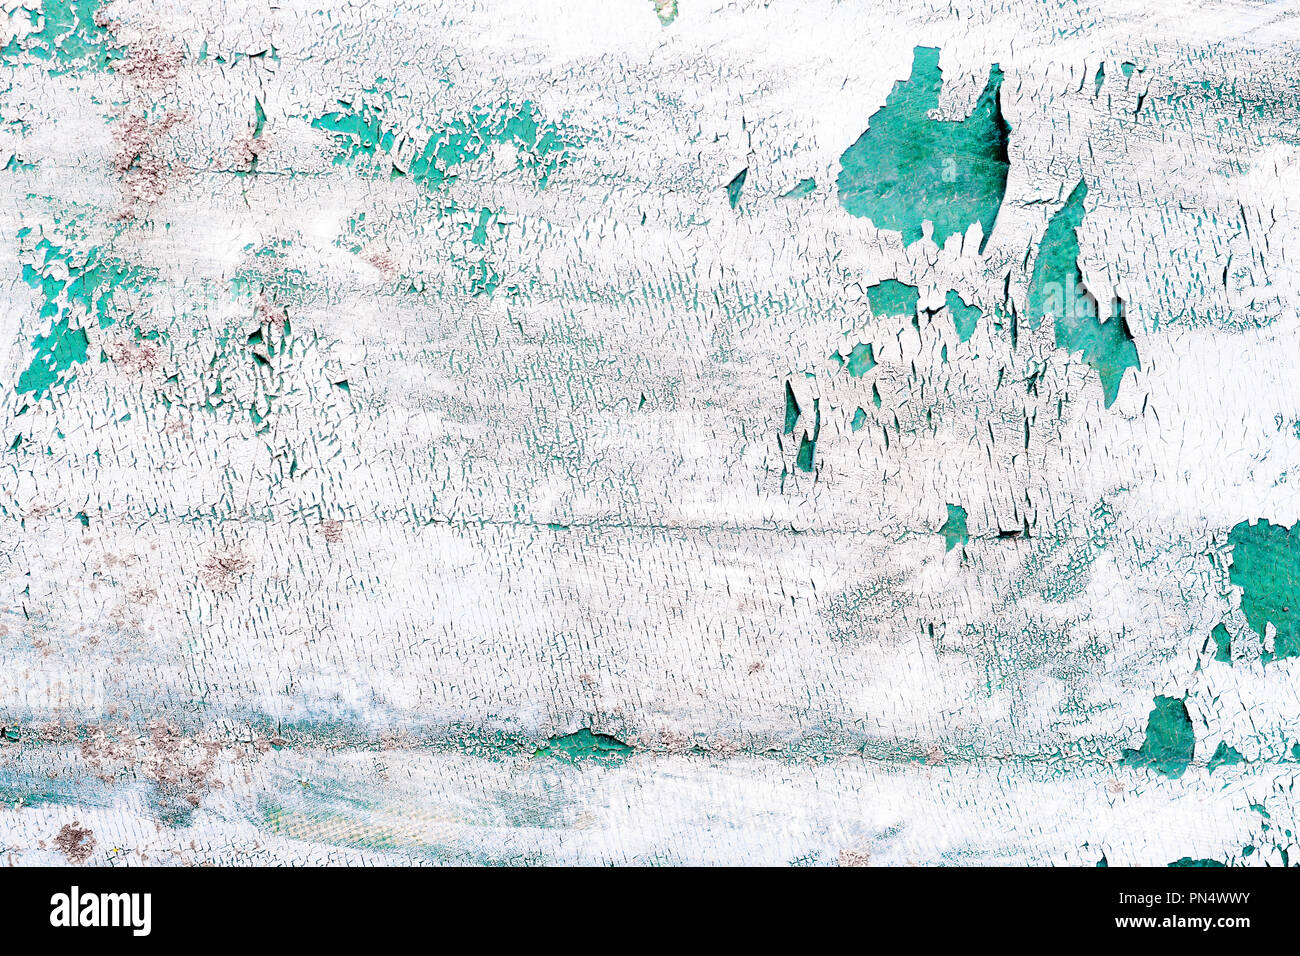 Cracked white paint layered on top of teal paint background texture Stock Photo